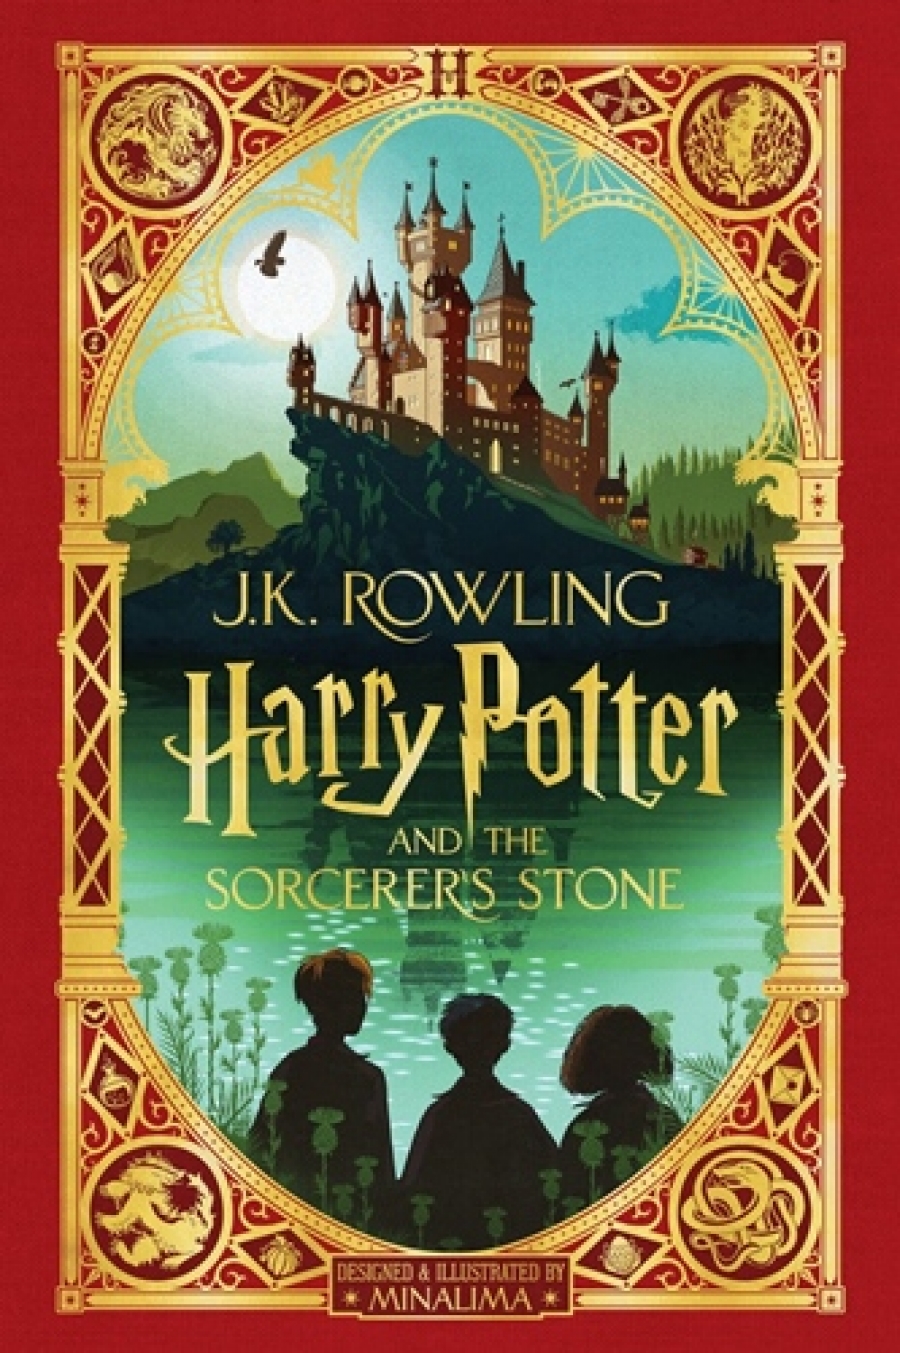 Rowling J.K. Harry Potter and the Sorcerer's Stone: Minalima Edition (Harry Potter, Book 1), Volume 1 